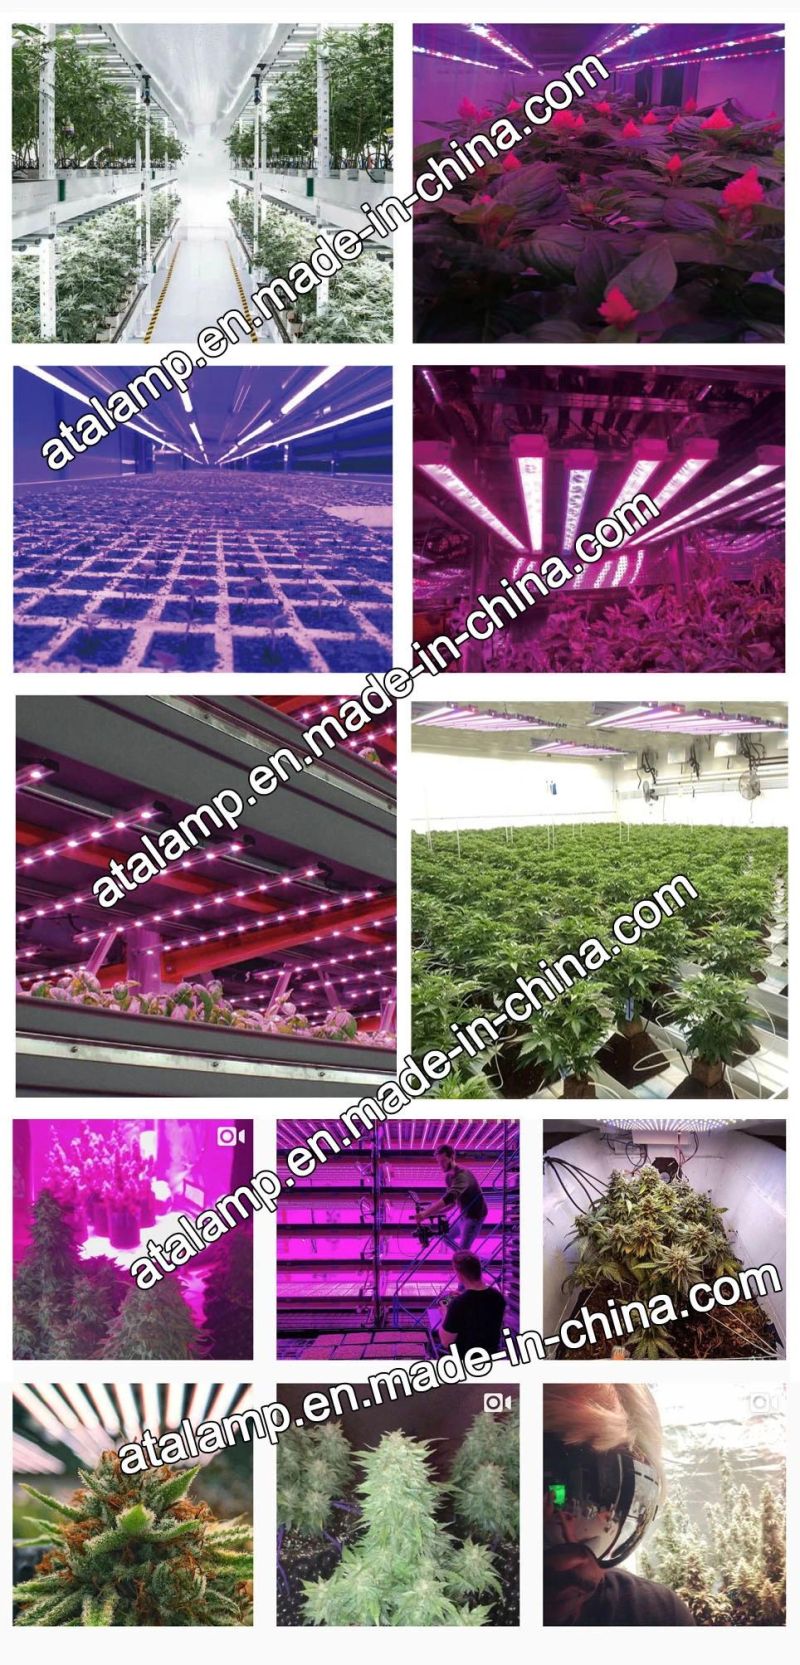 Wholesale Ce/RoHS Listed IP65 1000W Waterproof Full Spectrum LED Grow Light Bar for Hydroponic Lettuce/Tomato/Greenhouse